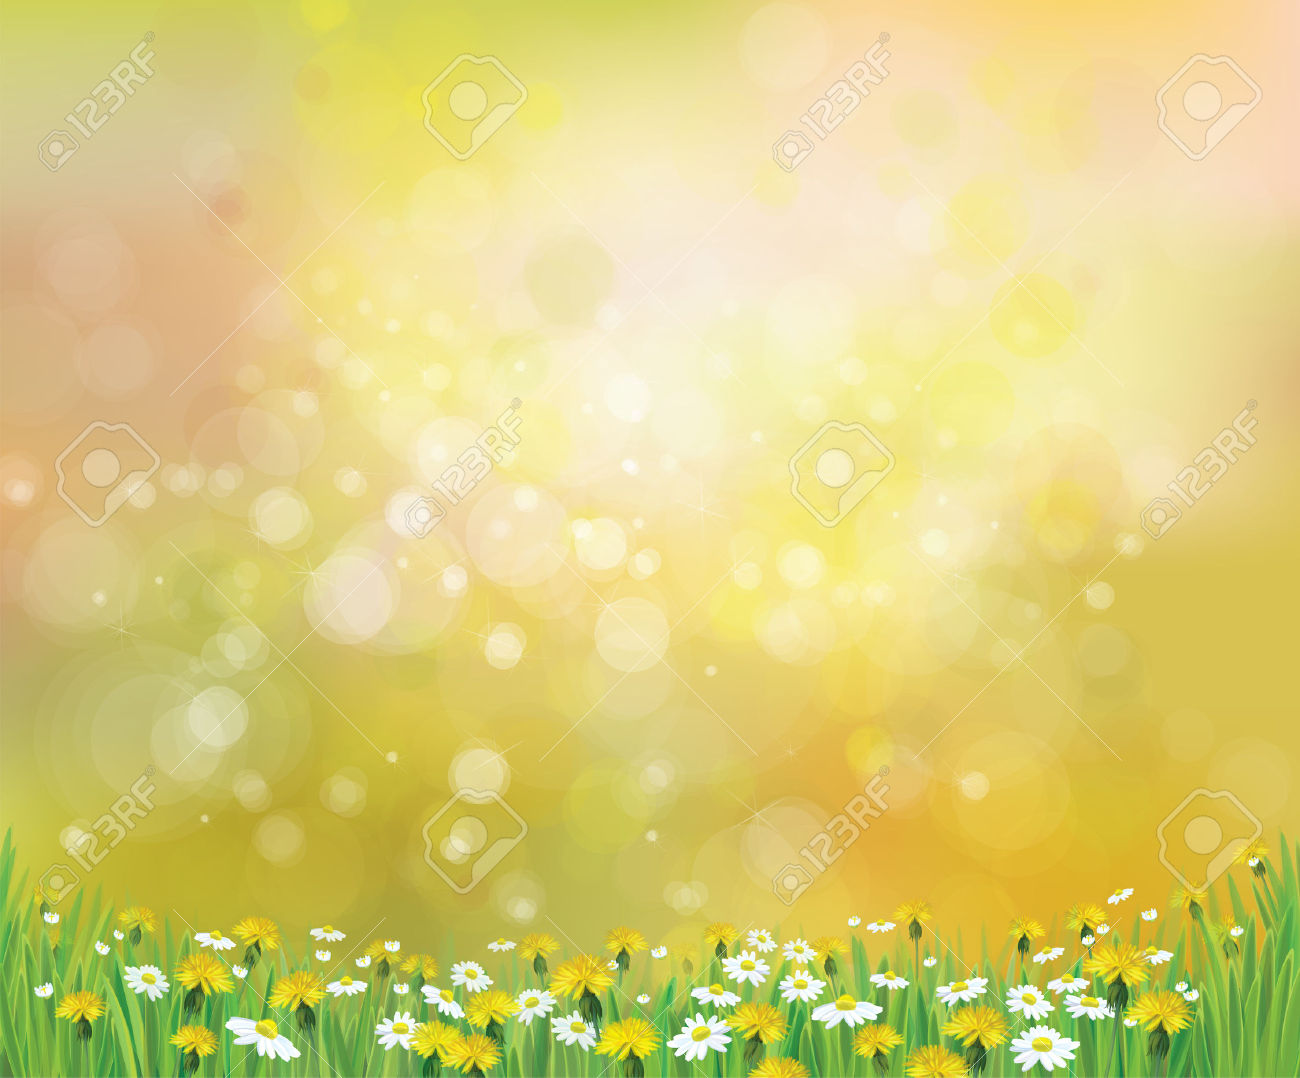 free spring clipart backgrounds - photo #30